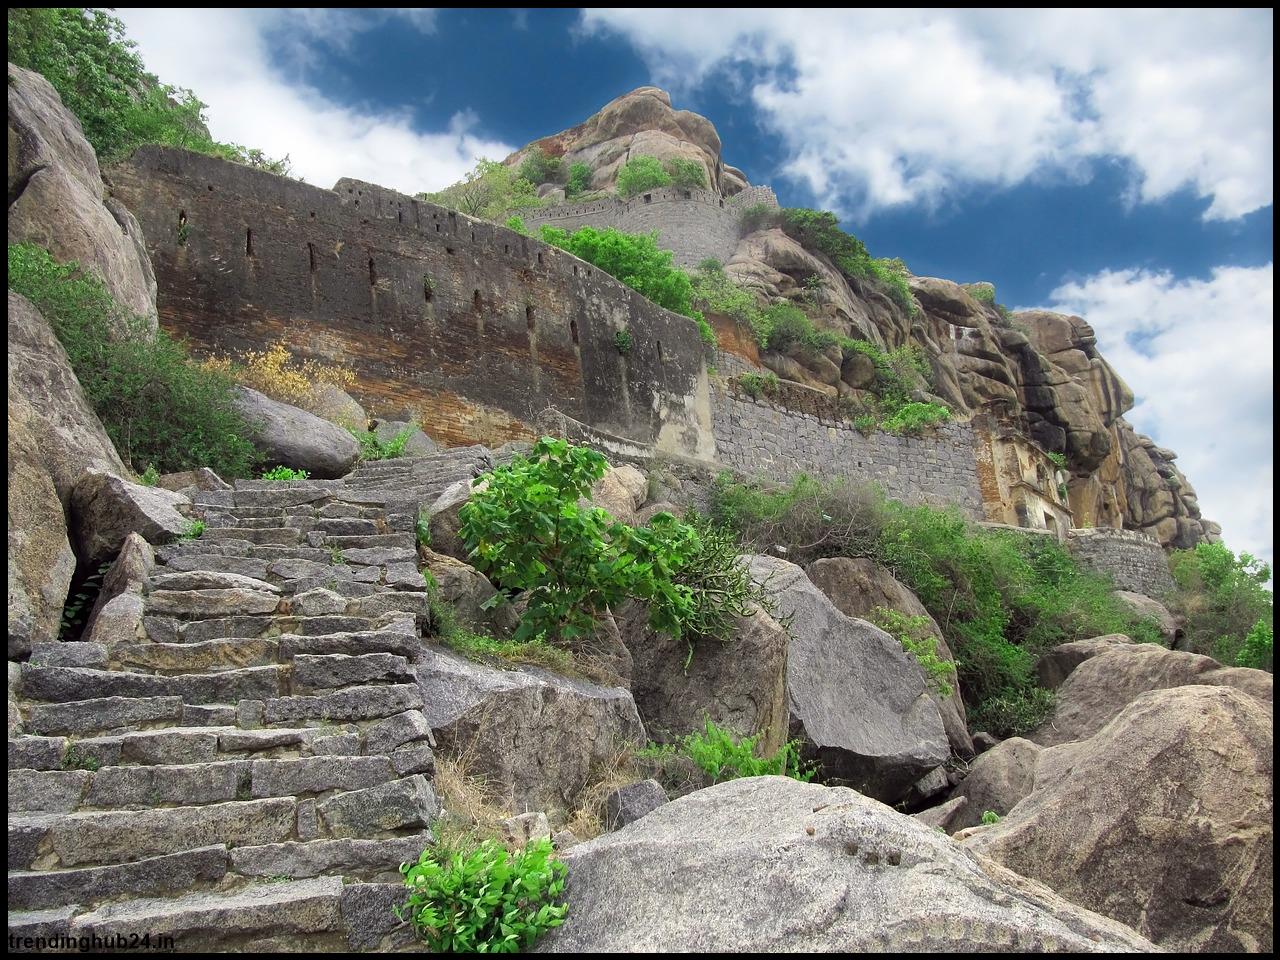 Exploring And Enjoy the Beauty Of Fort Kailasgad.jpg